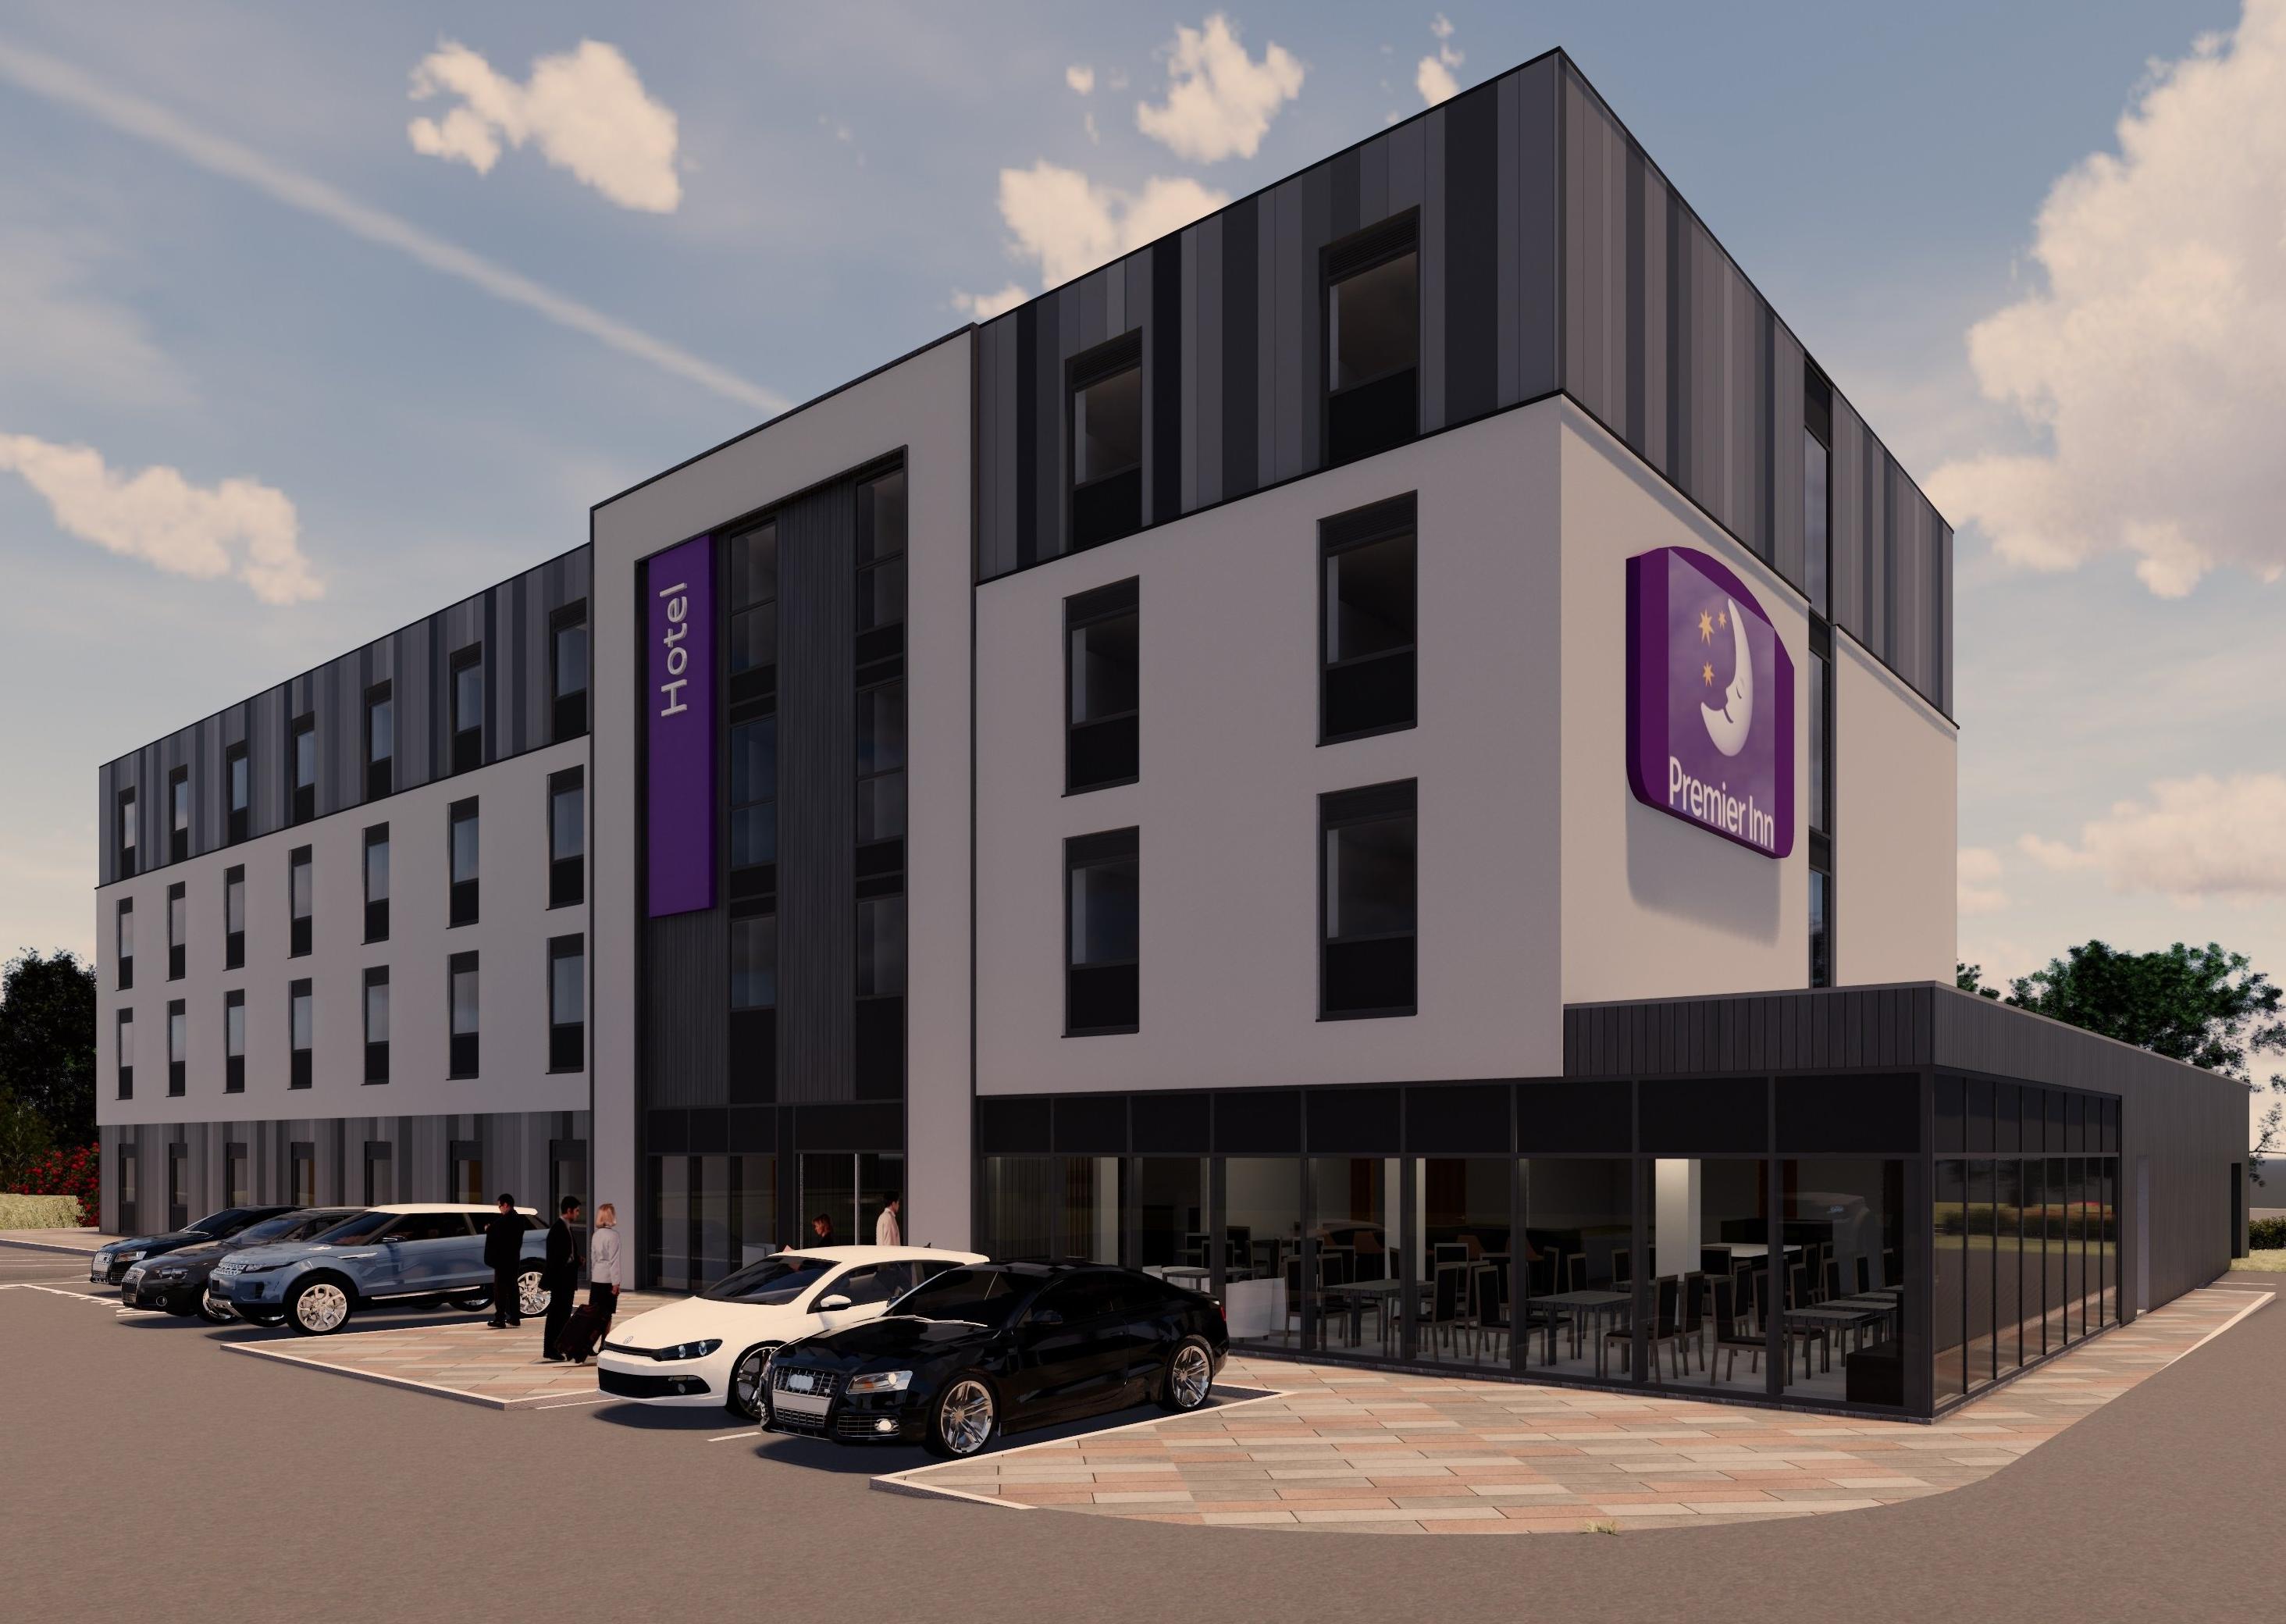 How the Premier Inn planned at Tweedbank as part of the £10m Borders Gateway development will look.